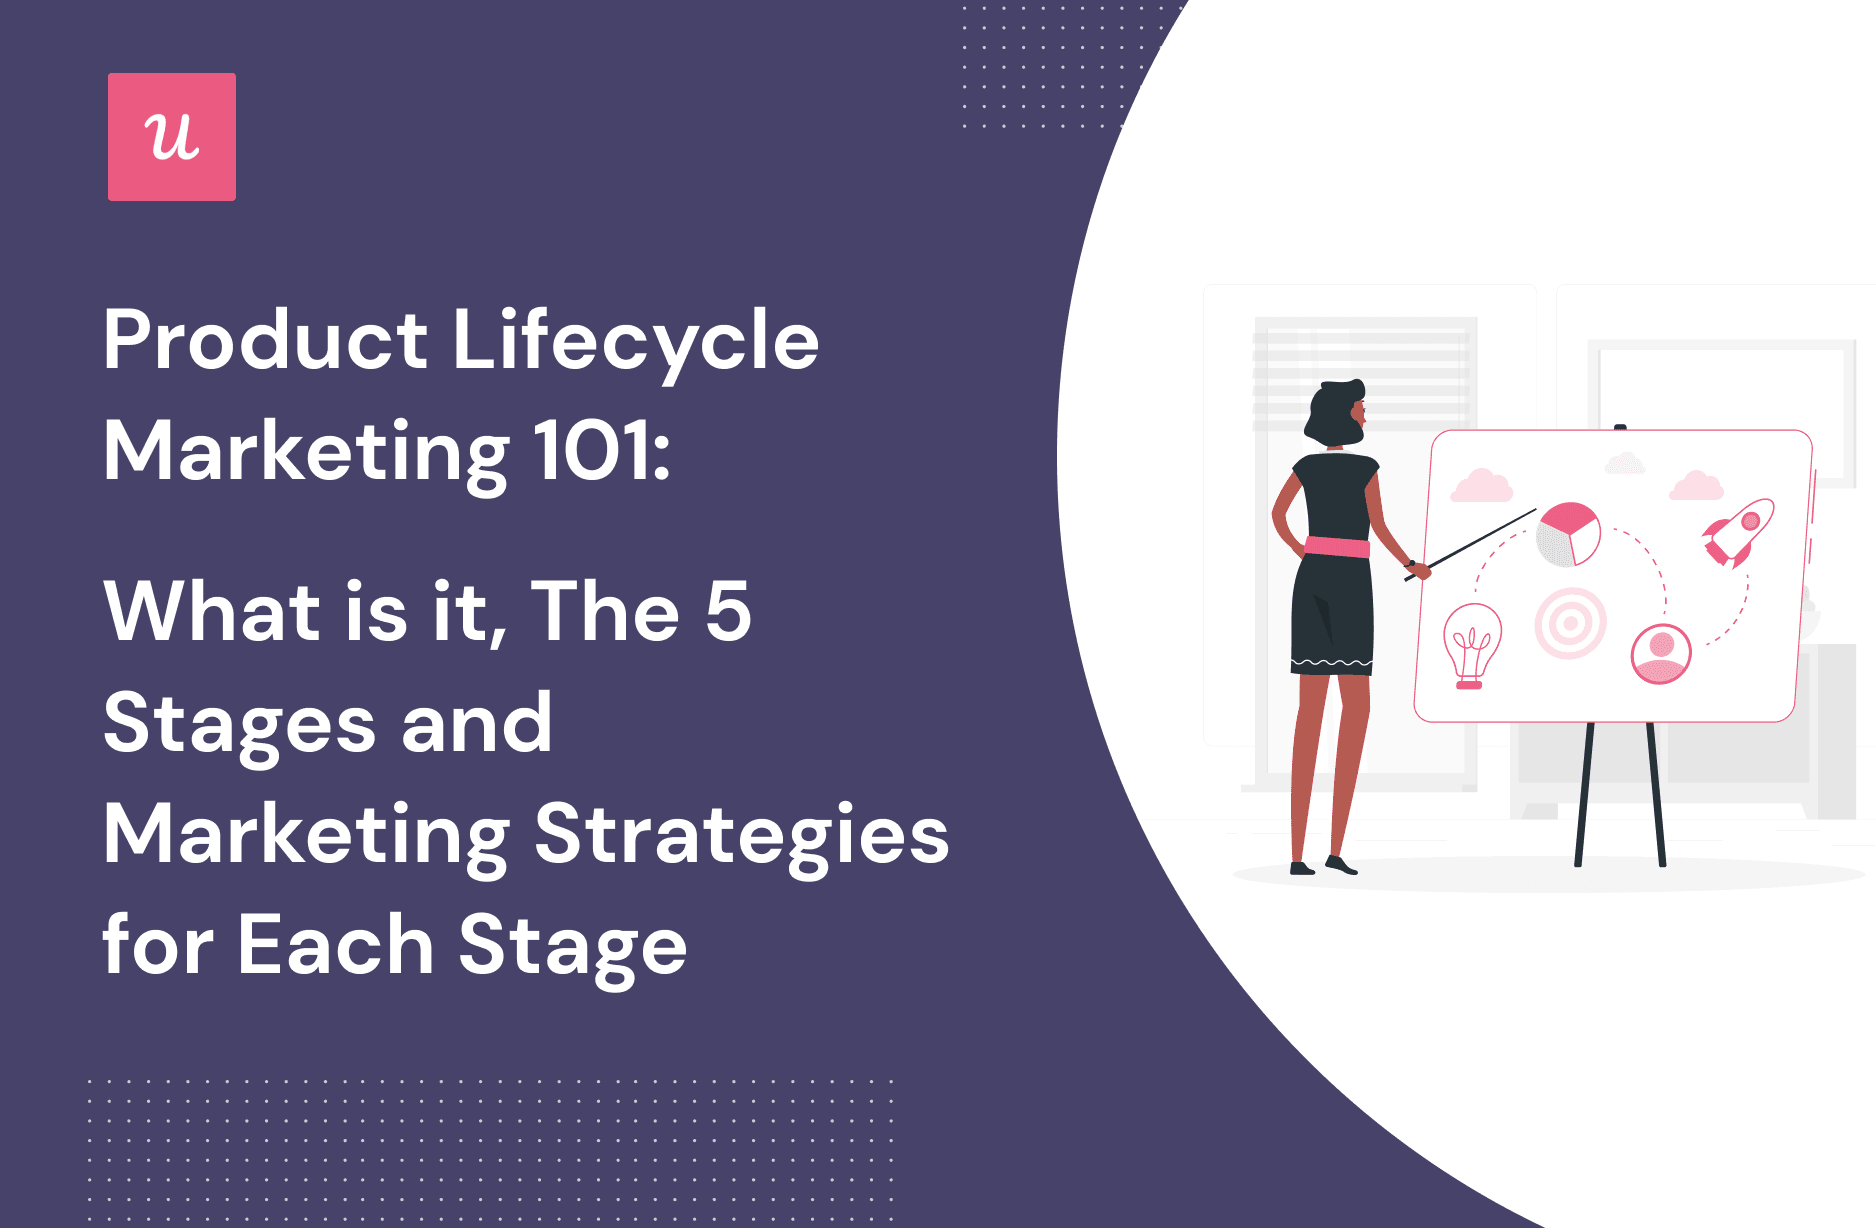 Lifecycle 101: Marketing Strategies for Each Stage